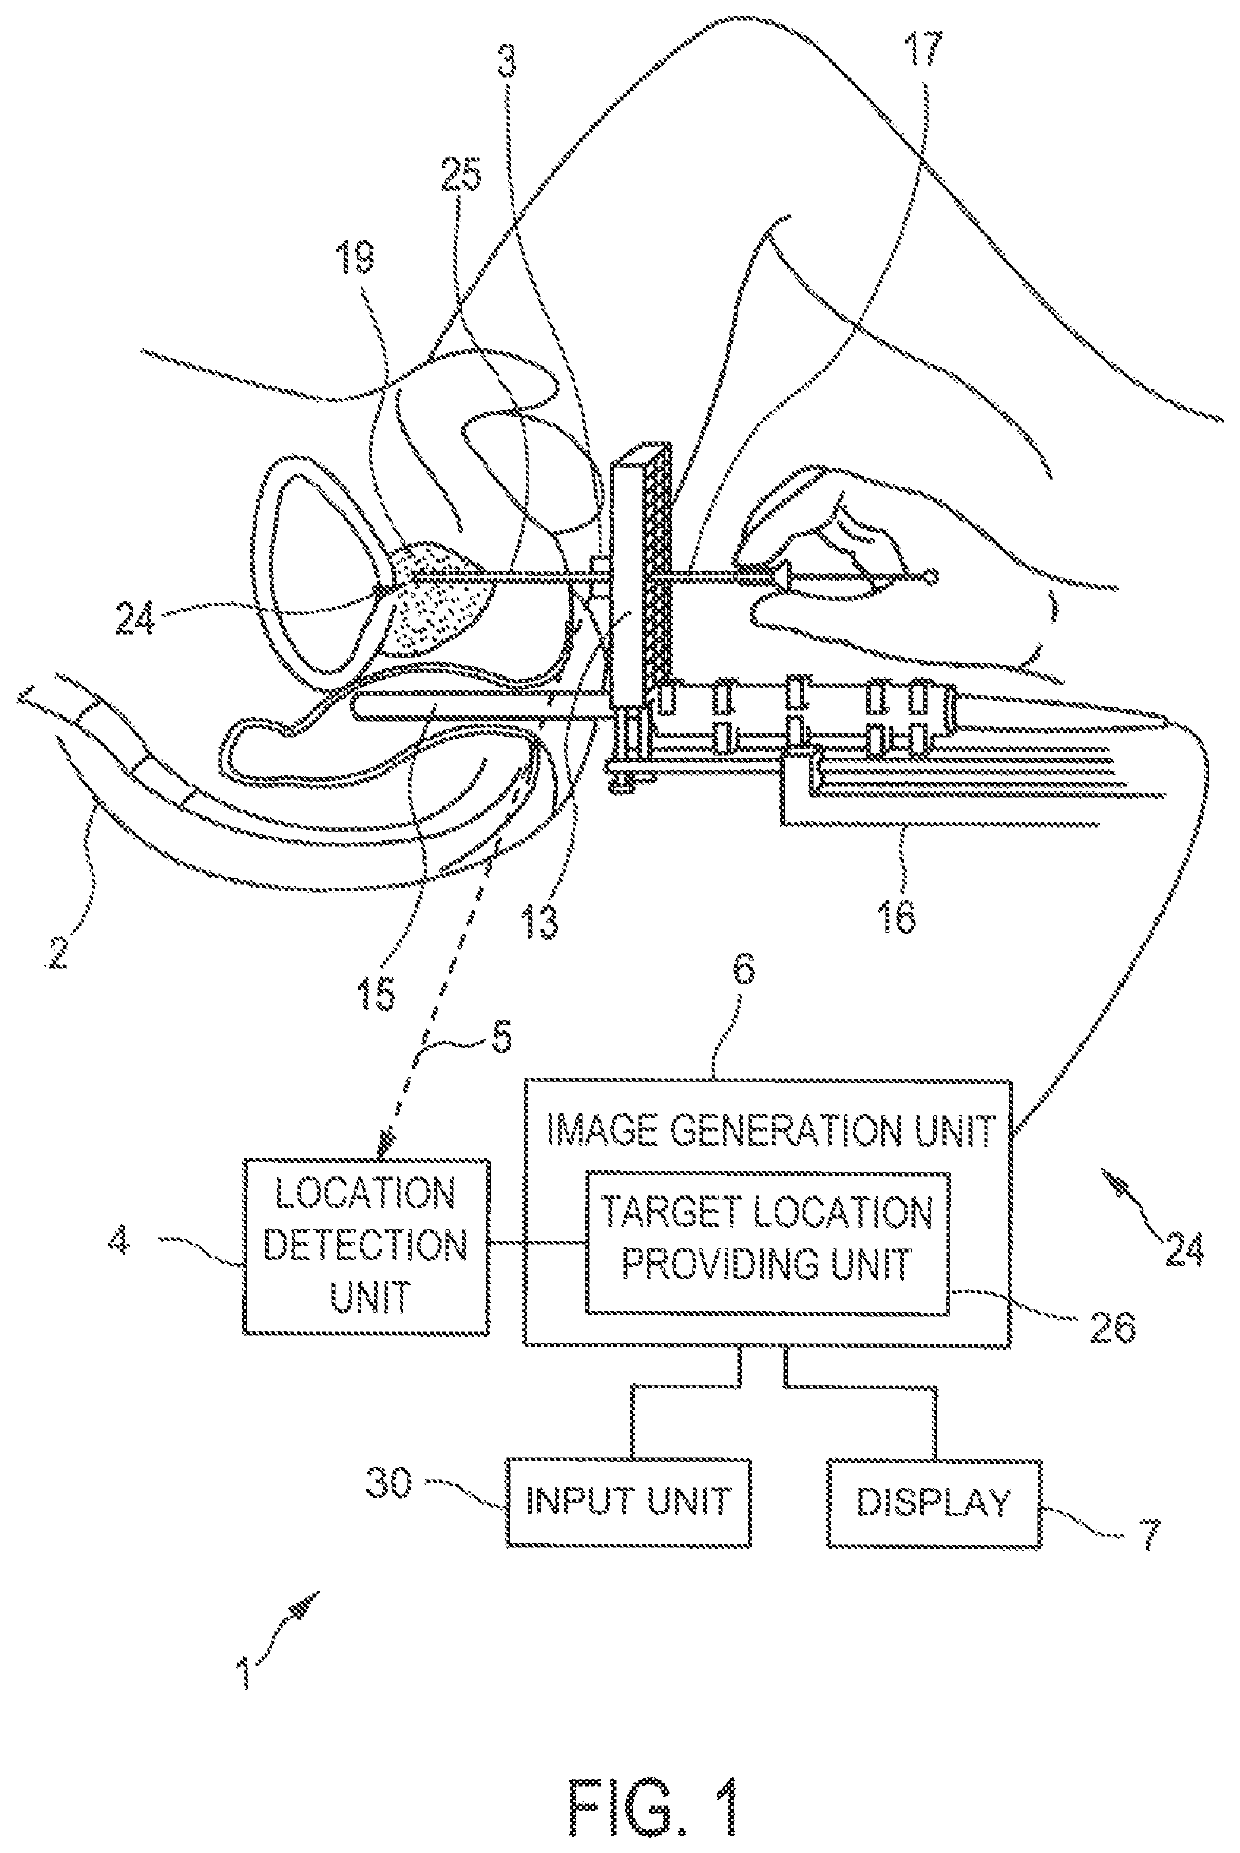 Imaging apparatus for brachytherapy or biopsy